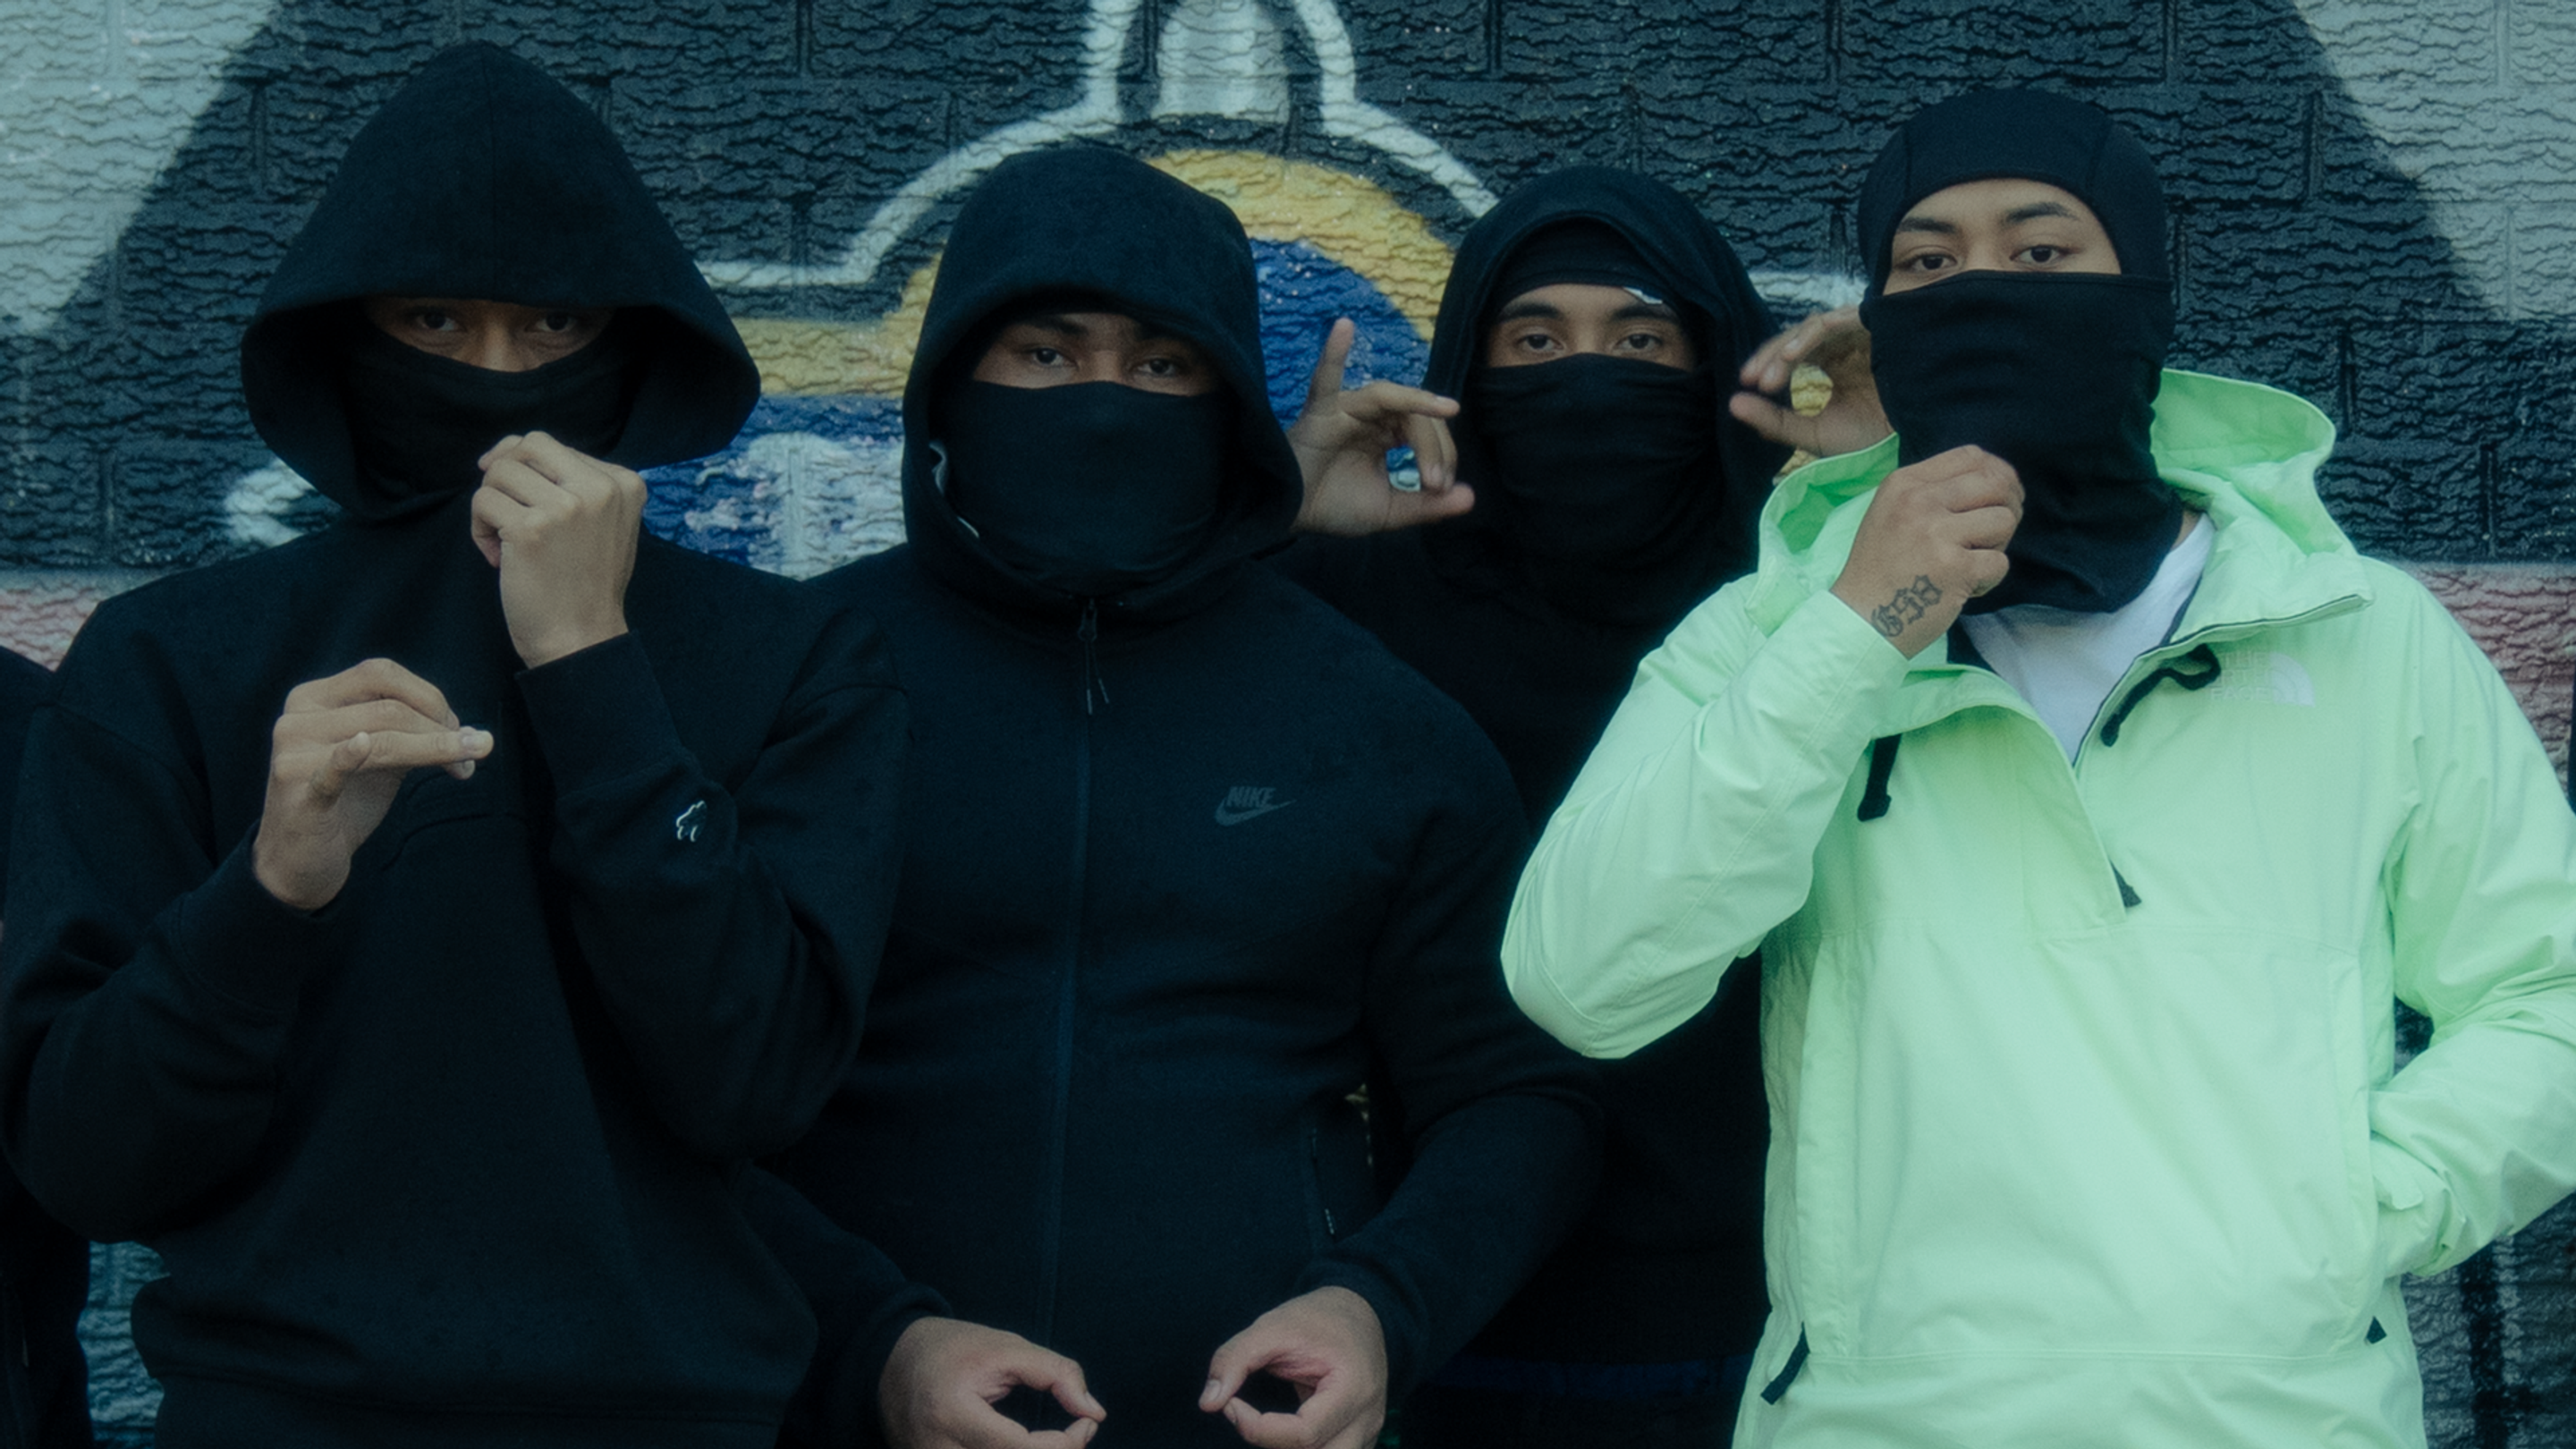 Four members of RFA17 wearing balaclavas over the faces and hoodies